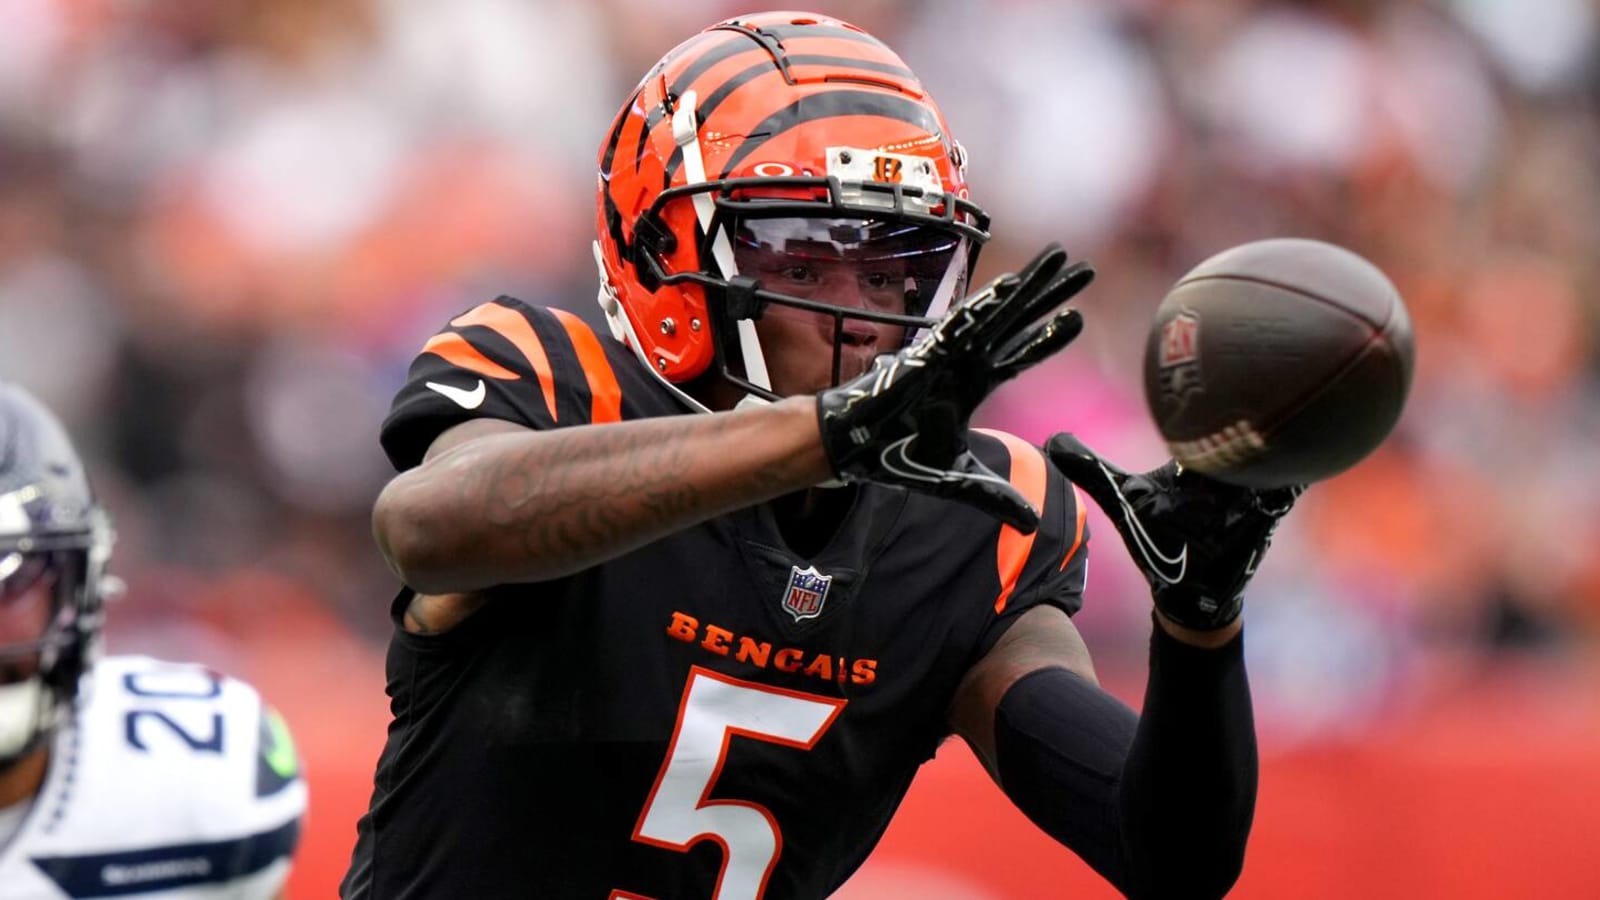 Bengals WR Tee Higgins faces another prove-it year